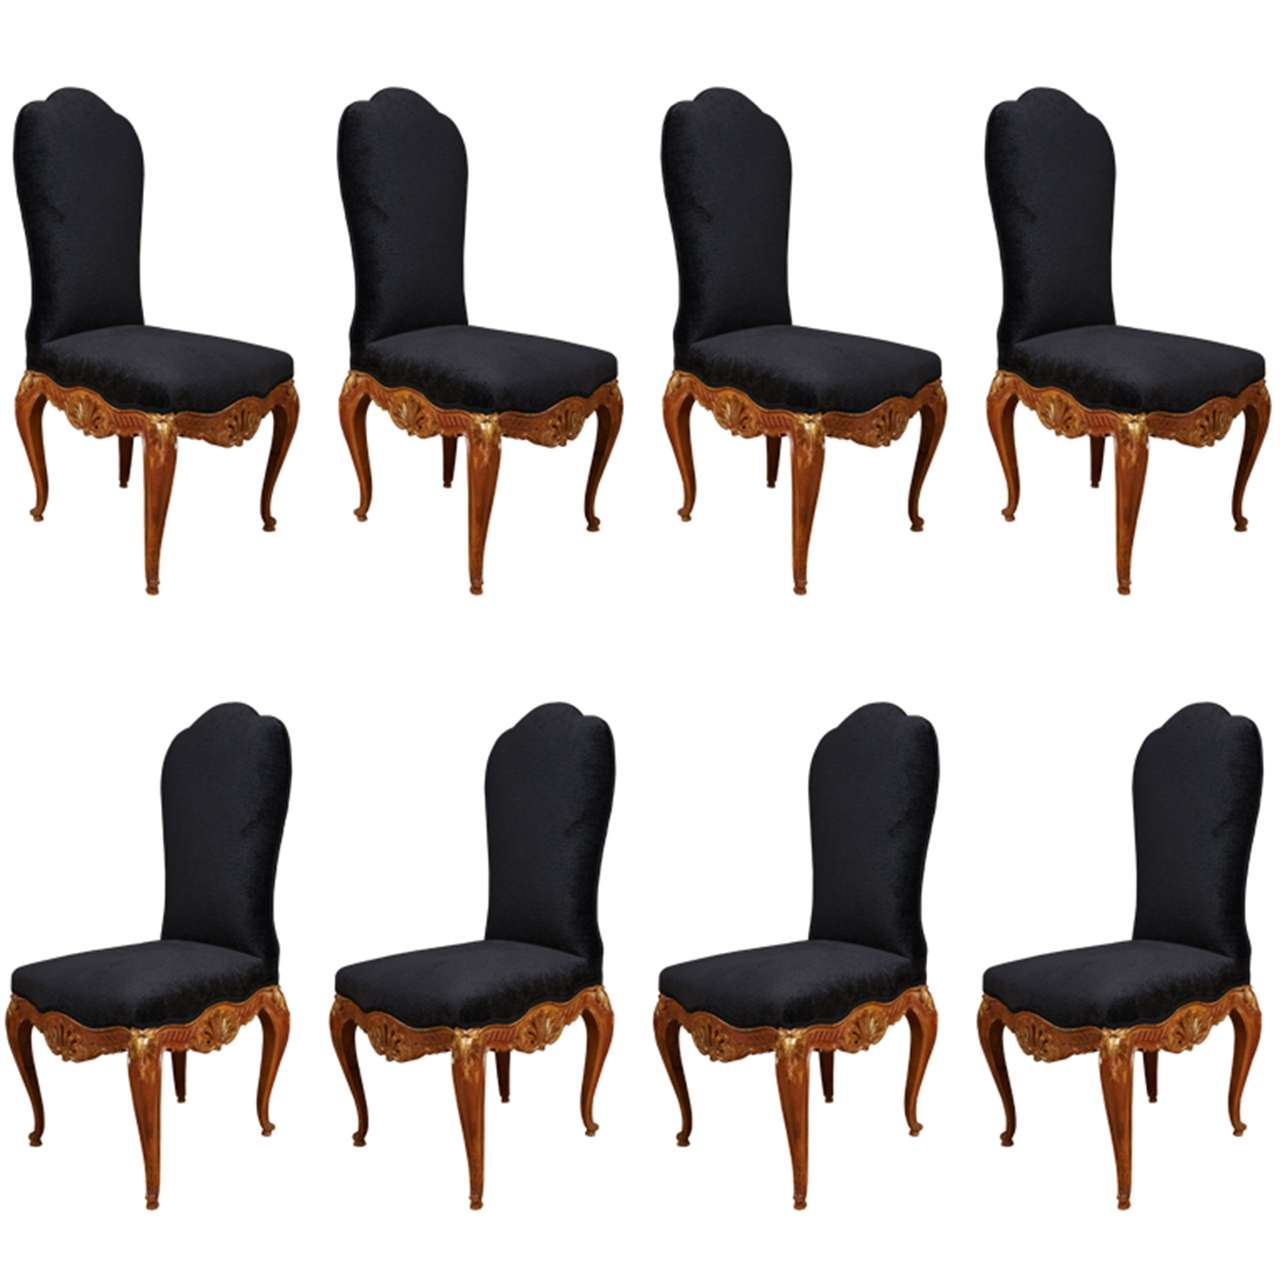 Rare set of 8 high back dining chairs by Jansen